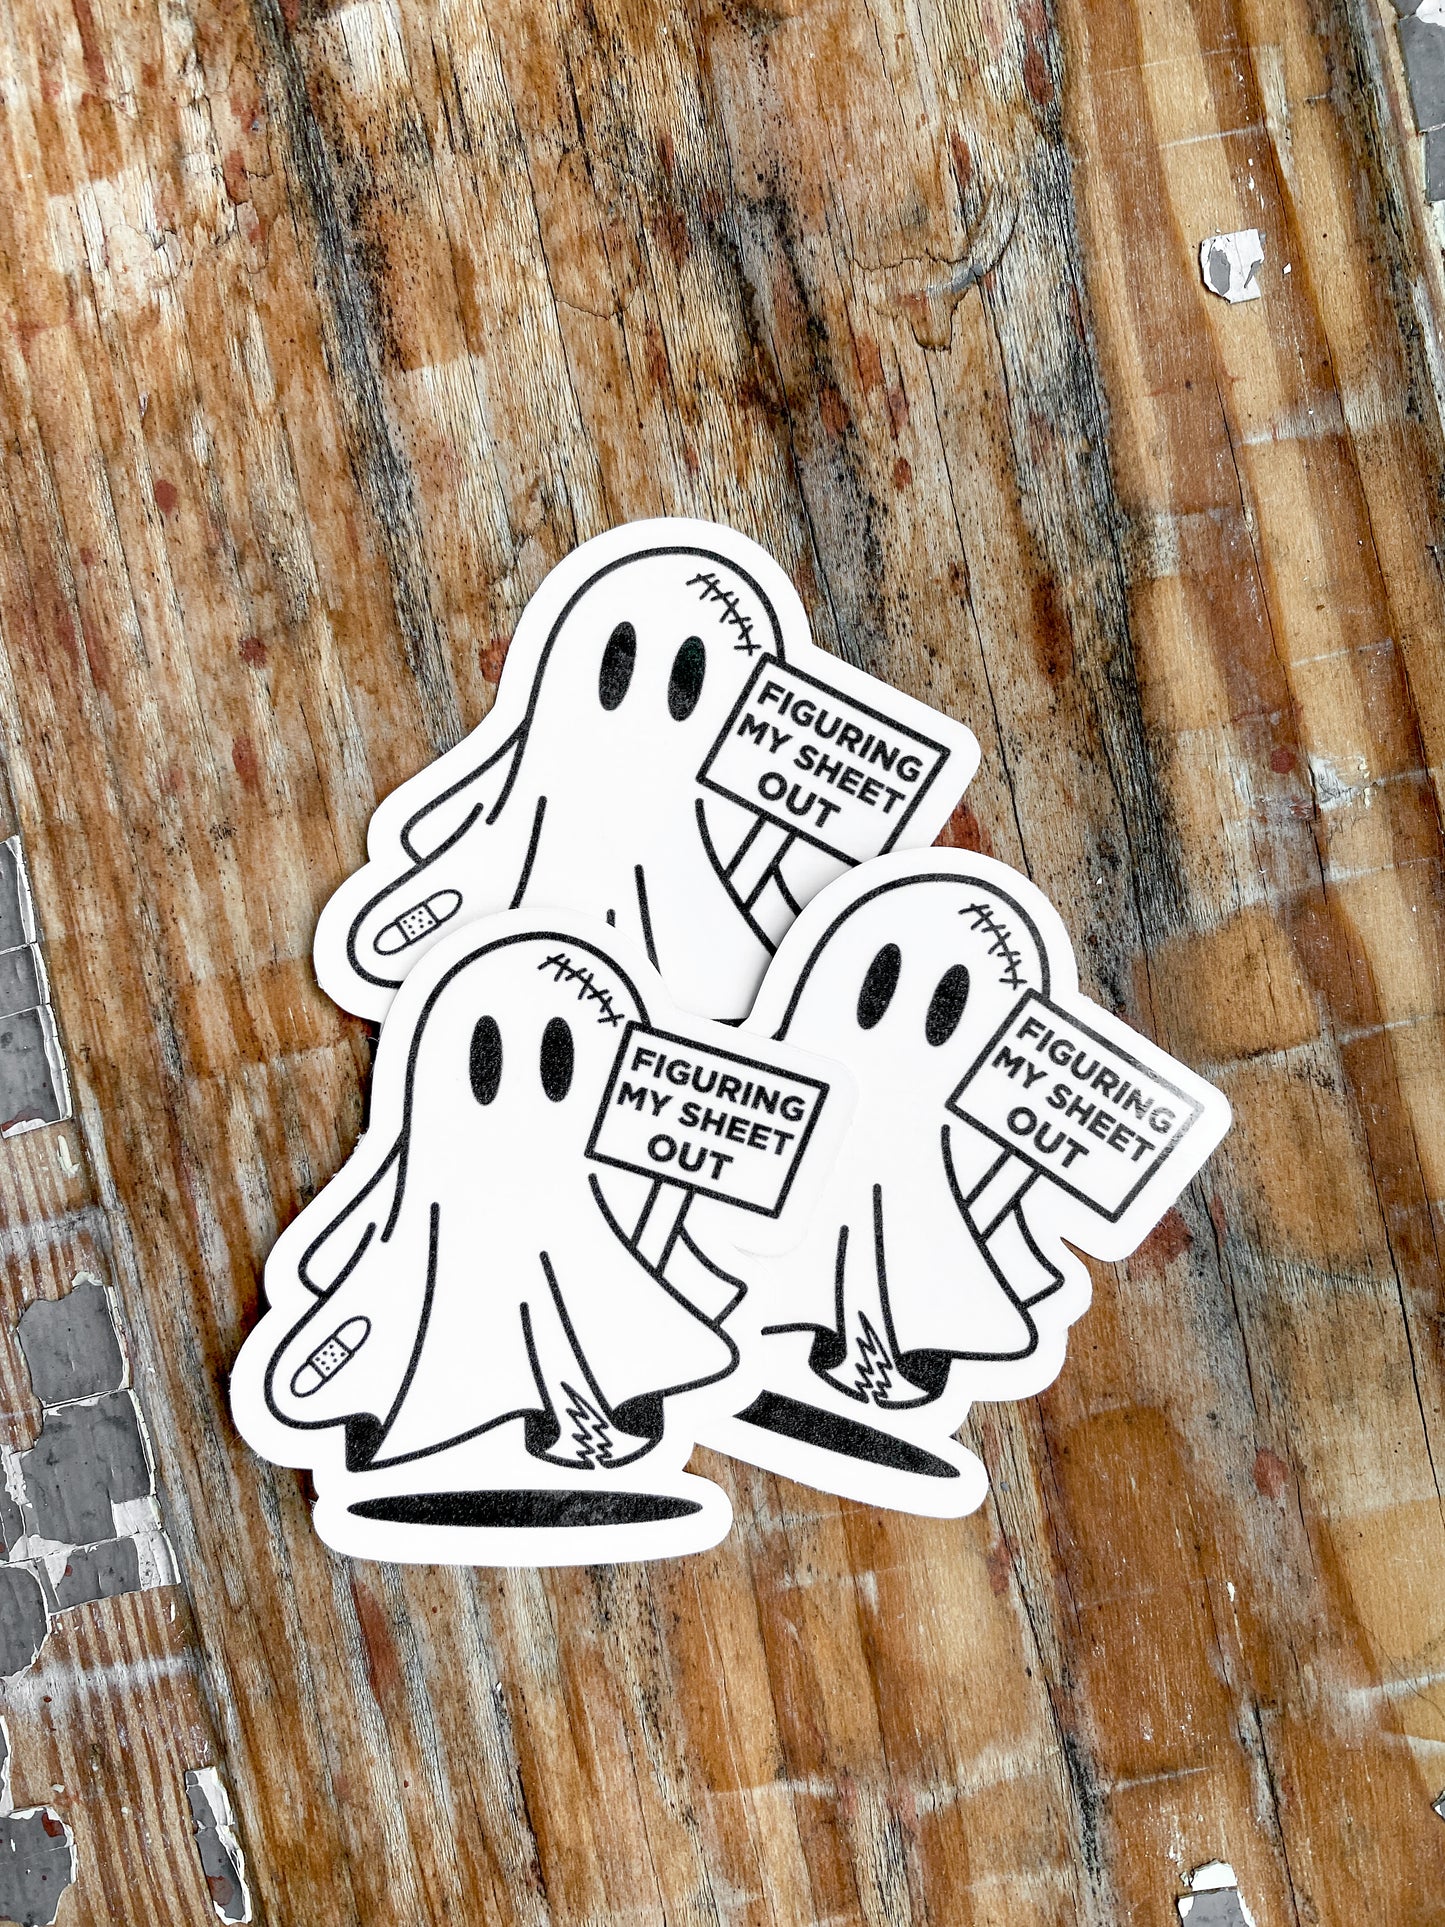 Collection of 3 spooky ghosts holding "figuring my sheet out" sign